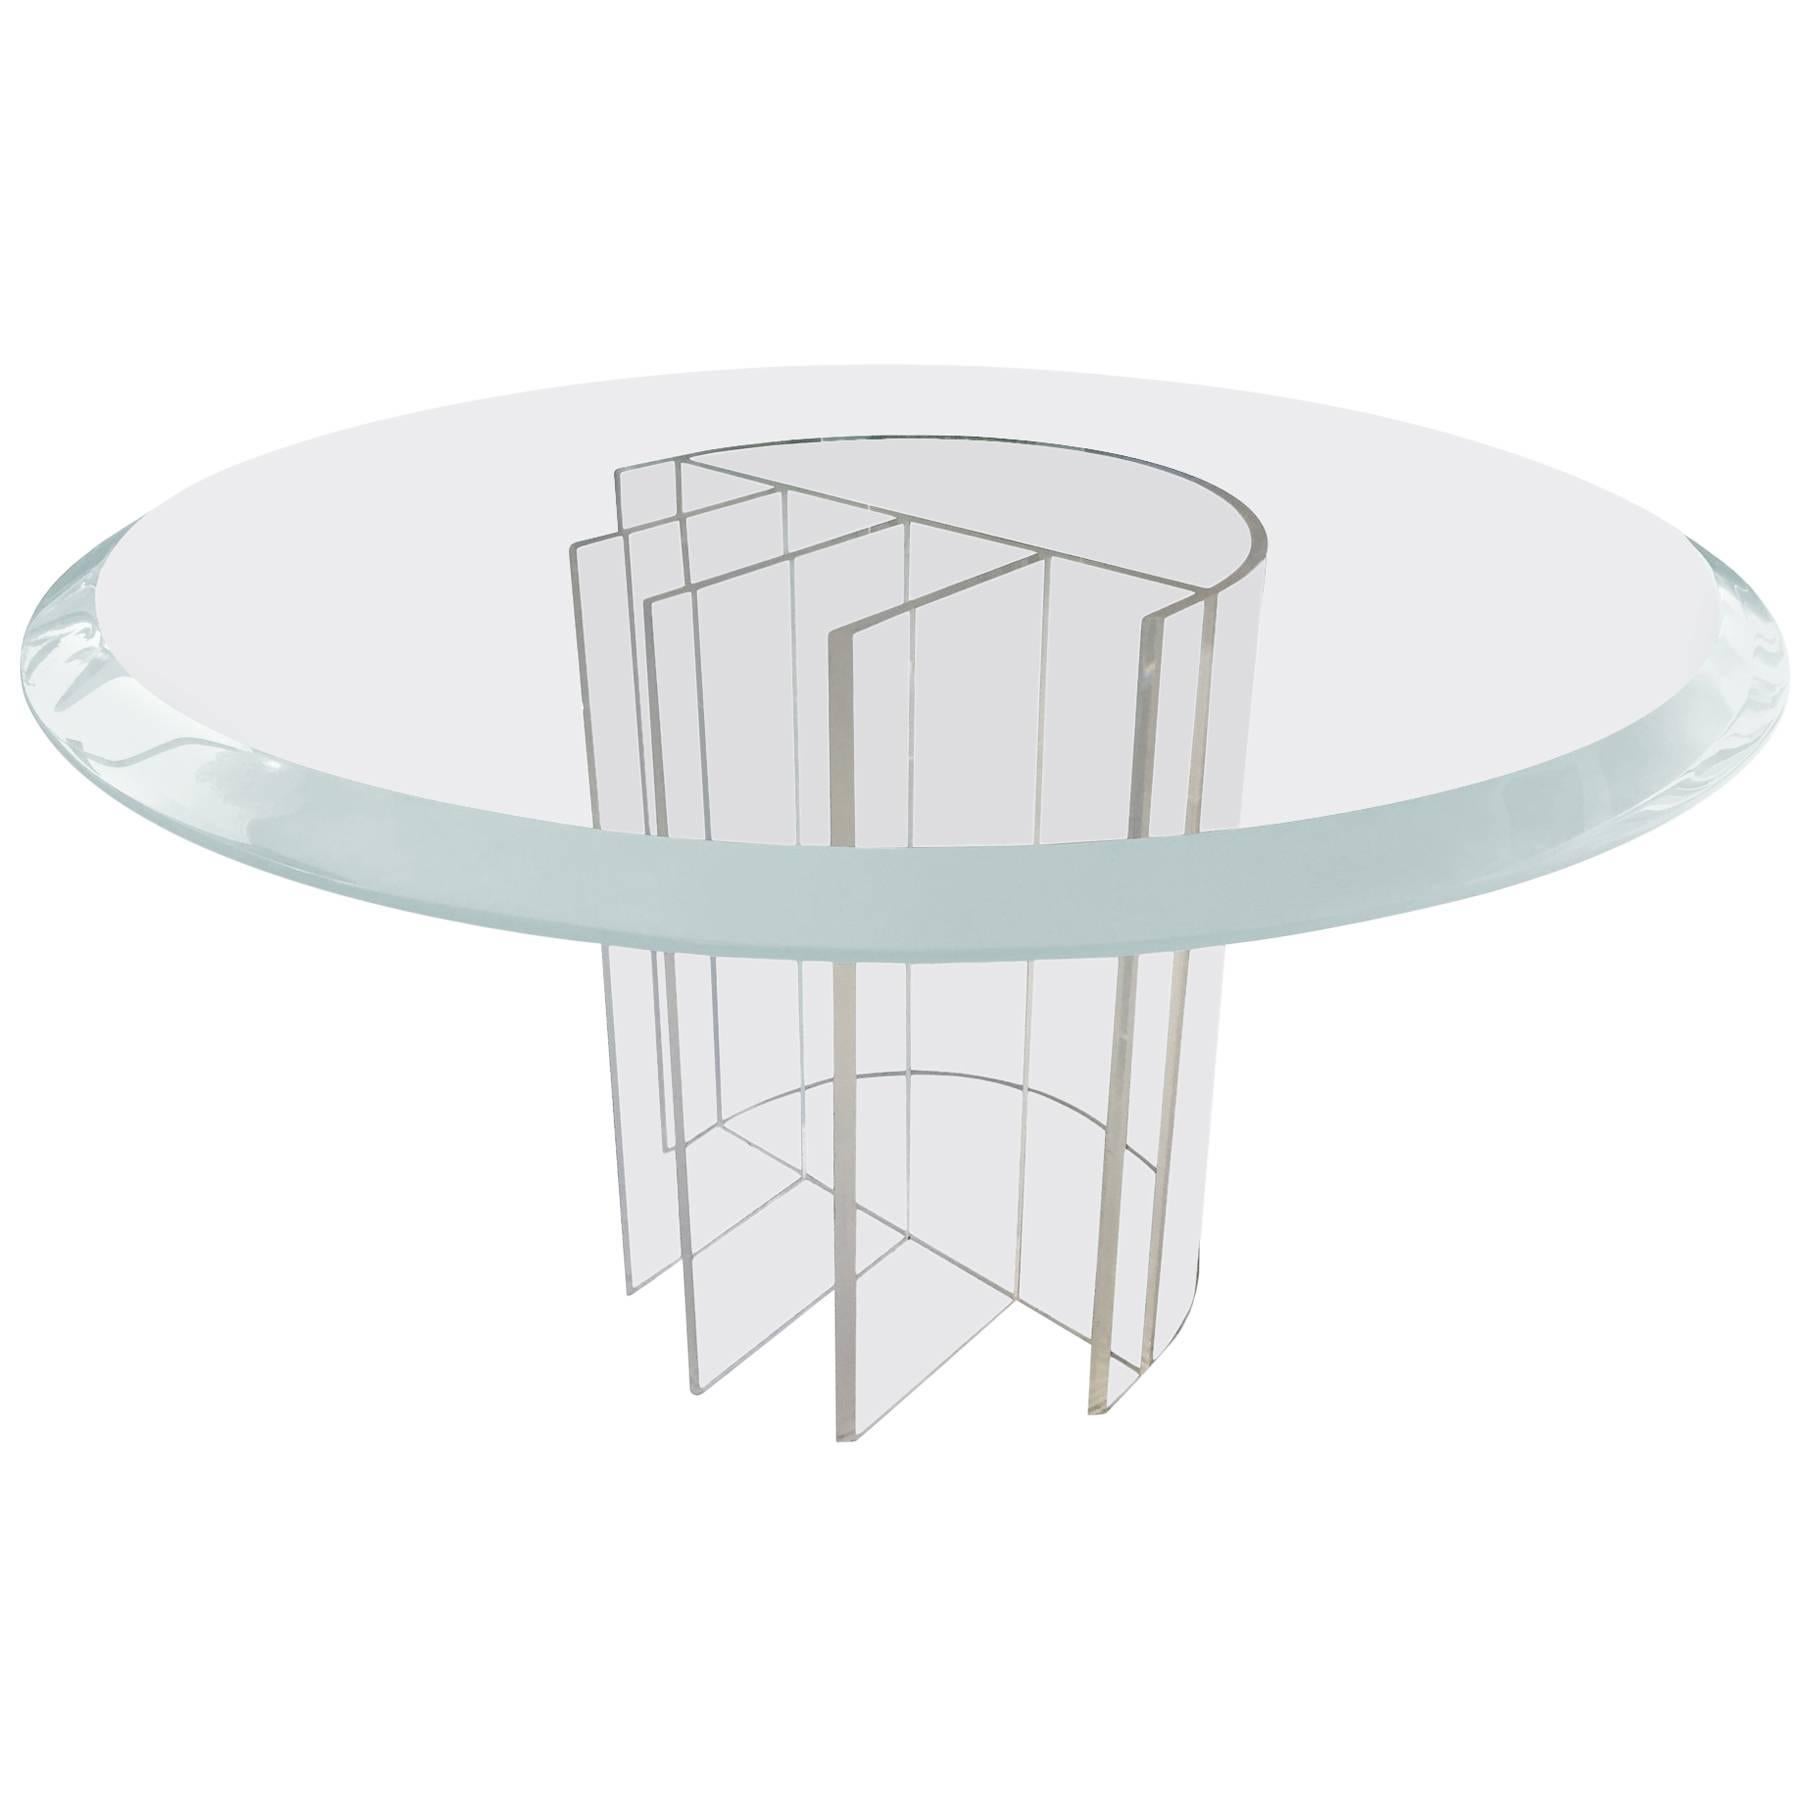 Lucite Dining Table by Charles Hollis Jones, "Blade" Line